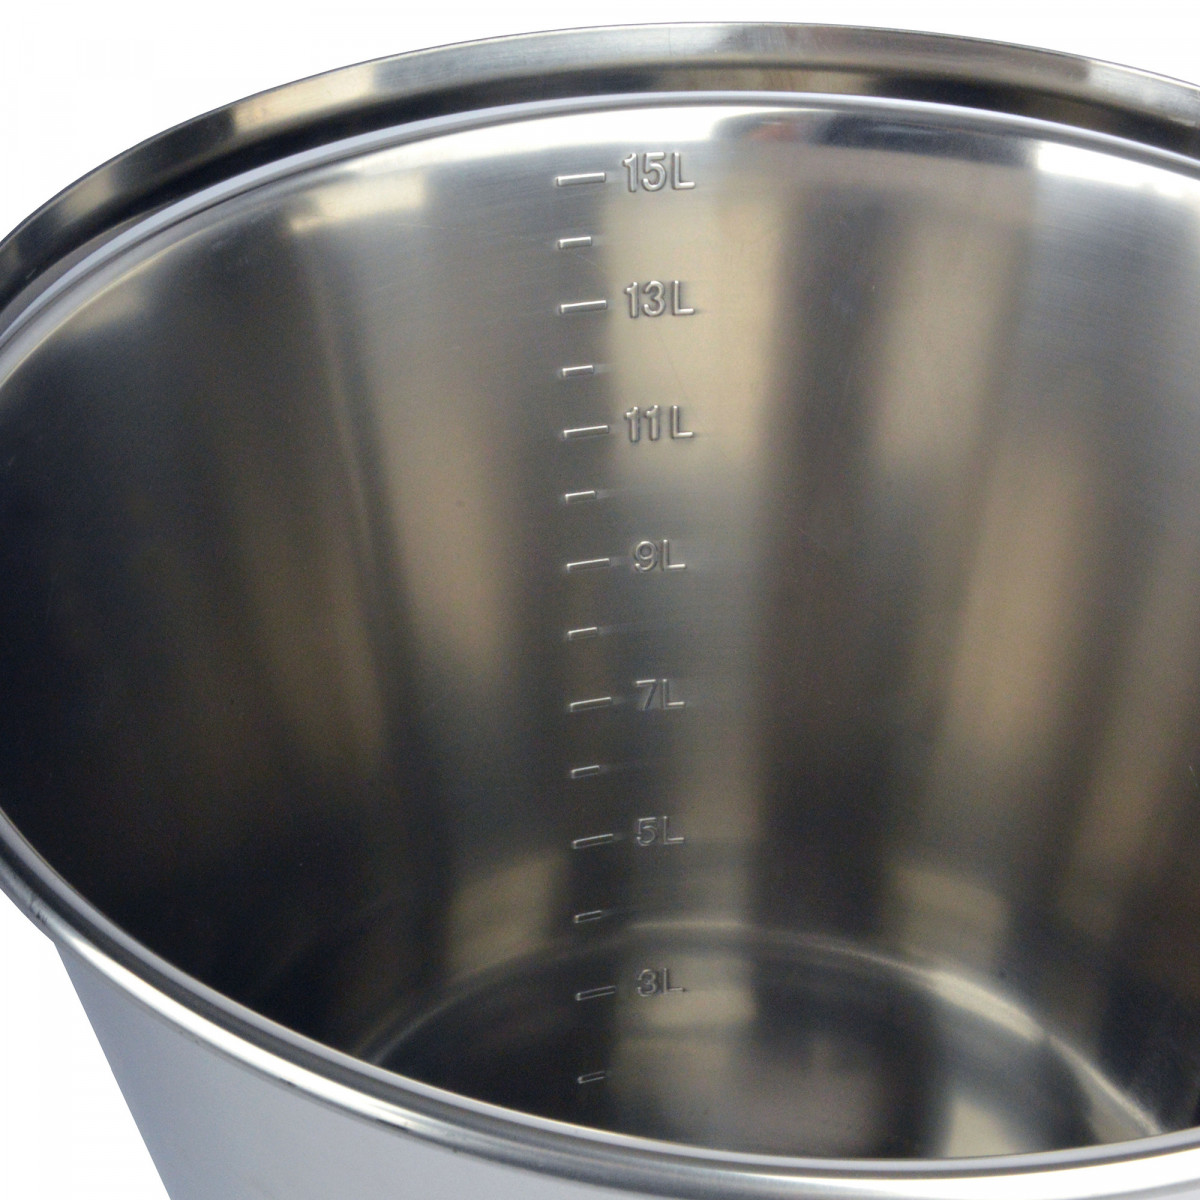 Graduated stainless steel bucket - 15 litre